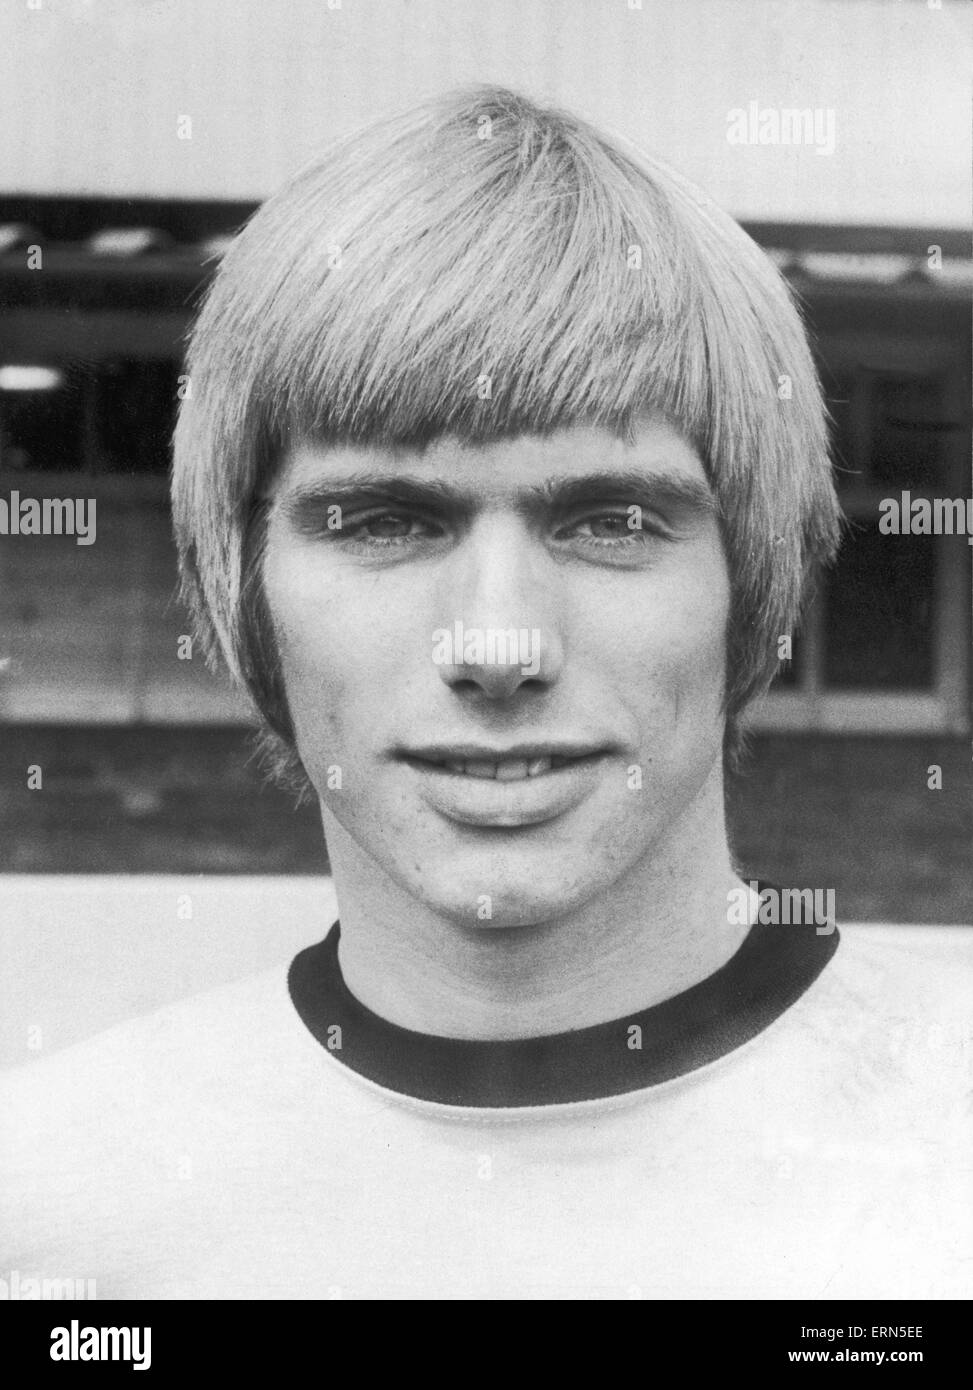 Portrait of footballer Alun Evans while at Wolverhampton Wanderers FC, 9th August 1966. Stock Photo